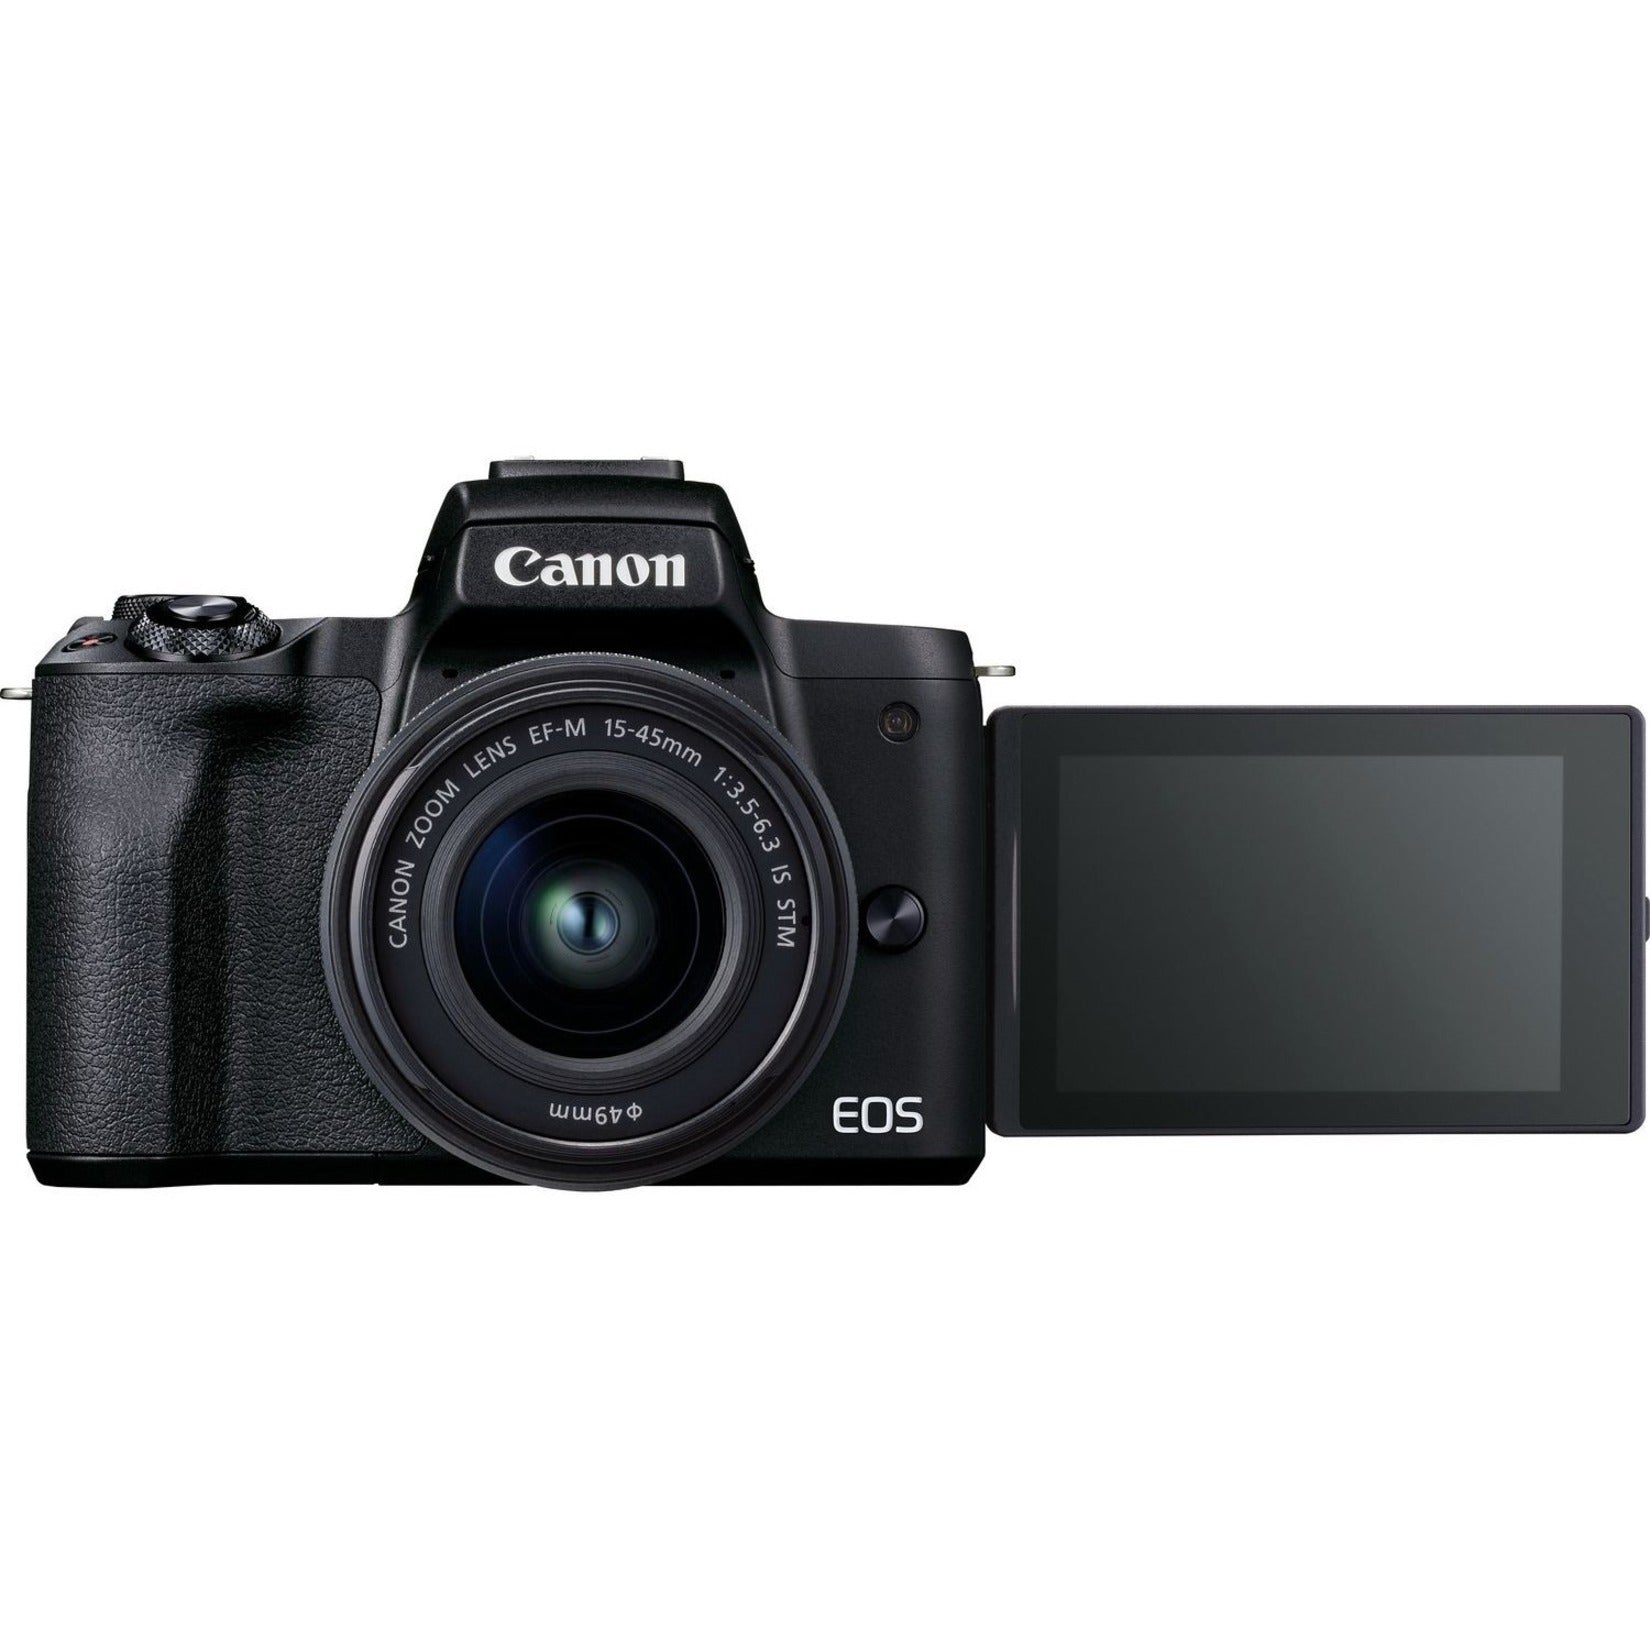 Canon 4728C006 EOS M50 Mark II Mirrorless Camera with EF-M 15-45mm f/3.5-6.3 IS STM Zoom Lens, Black